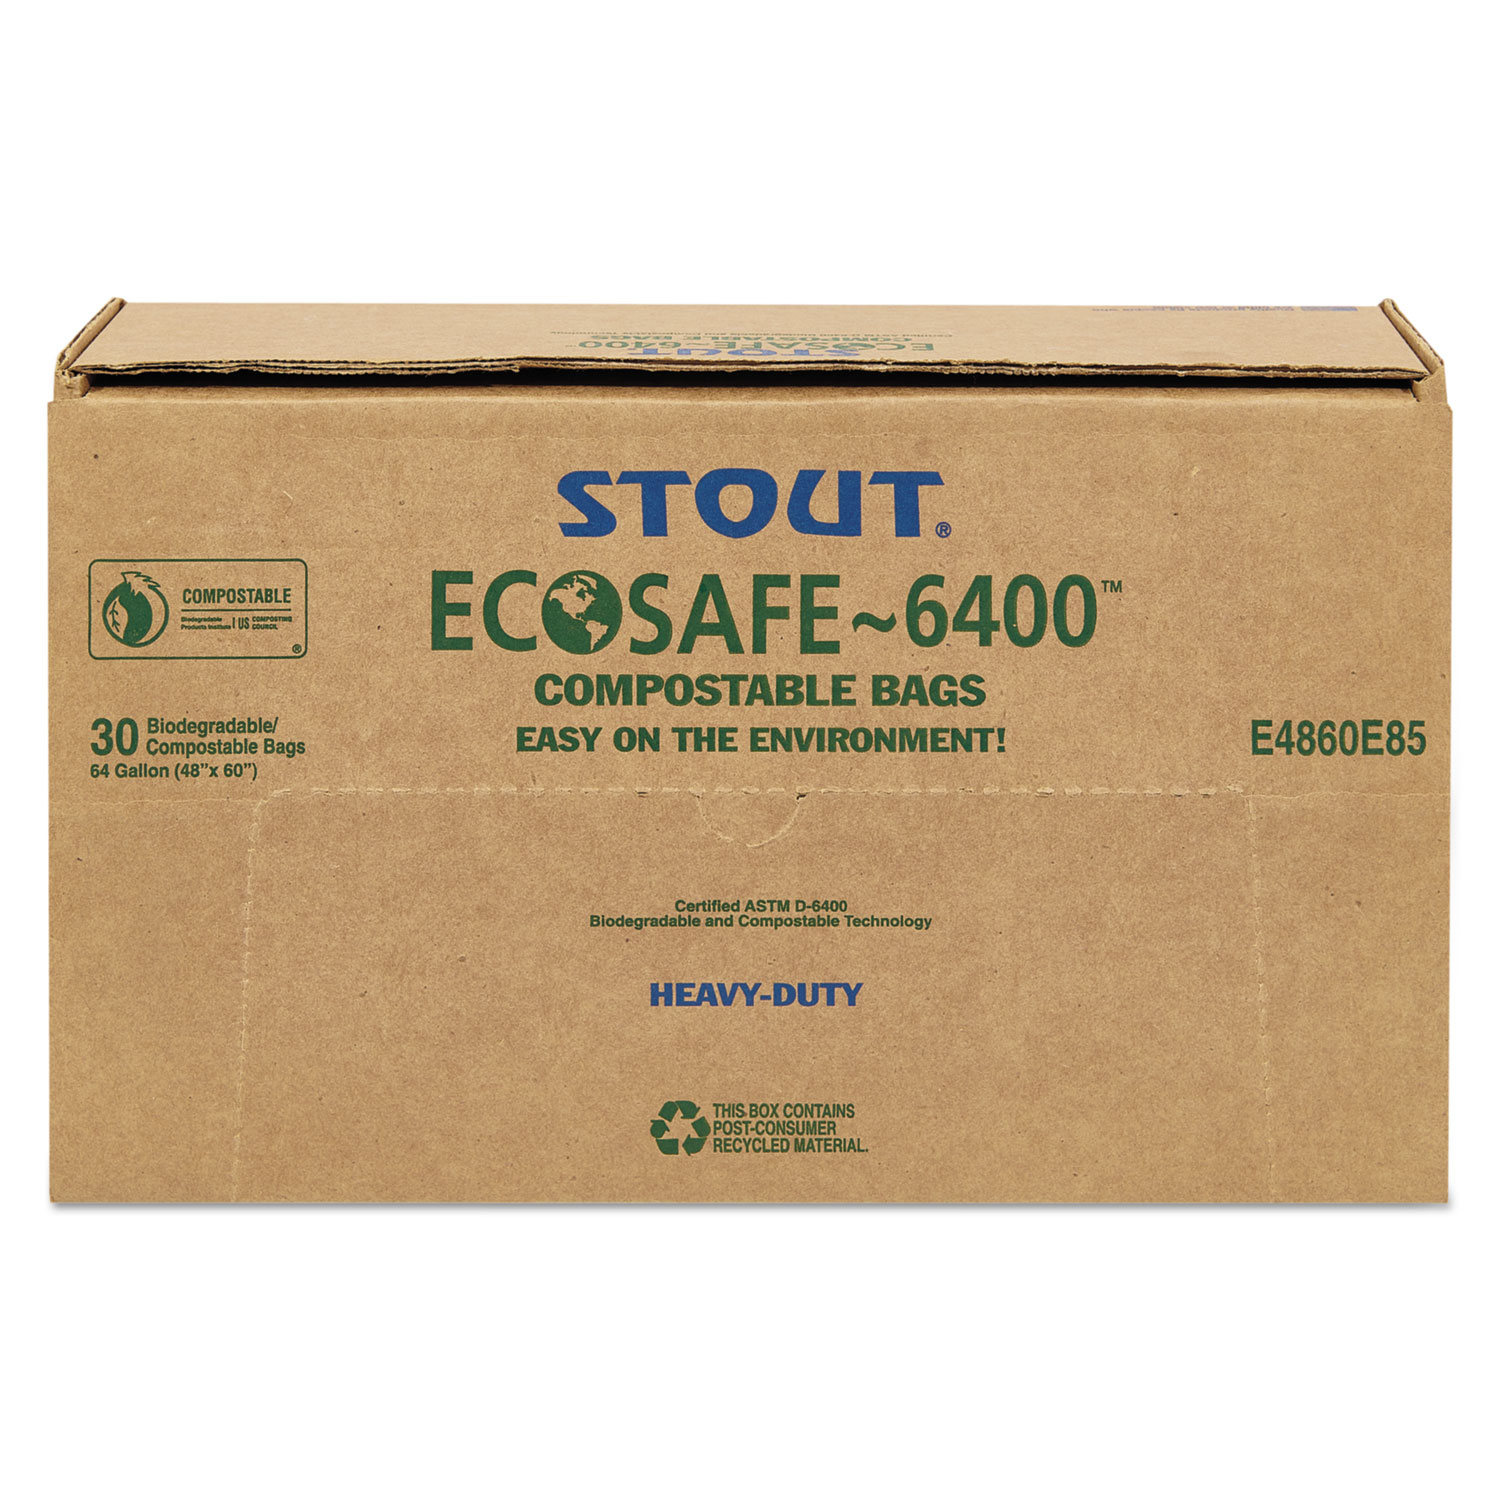 Compostable Trash Bags,64Gal,.85mil,48x60,30/BX,Green, Sold as 1 Box